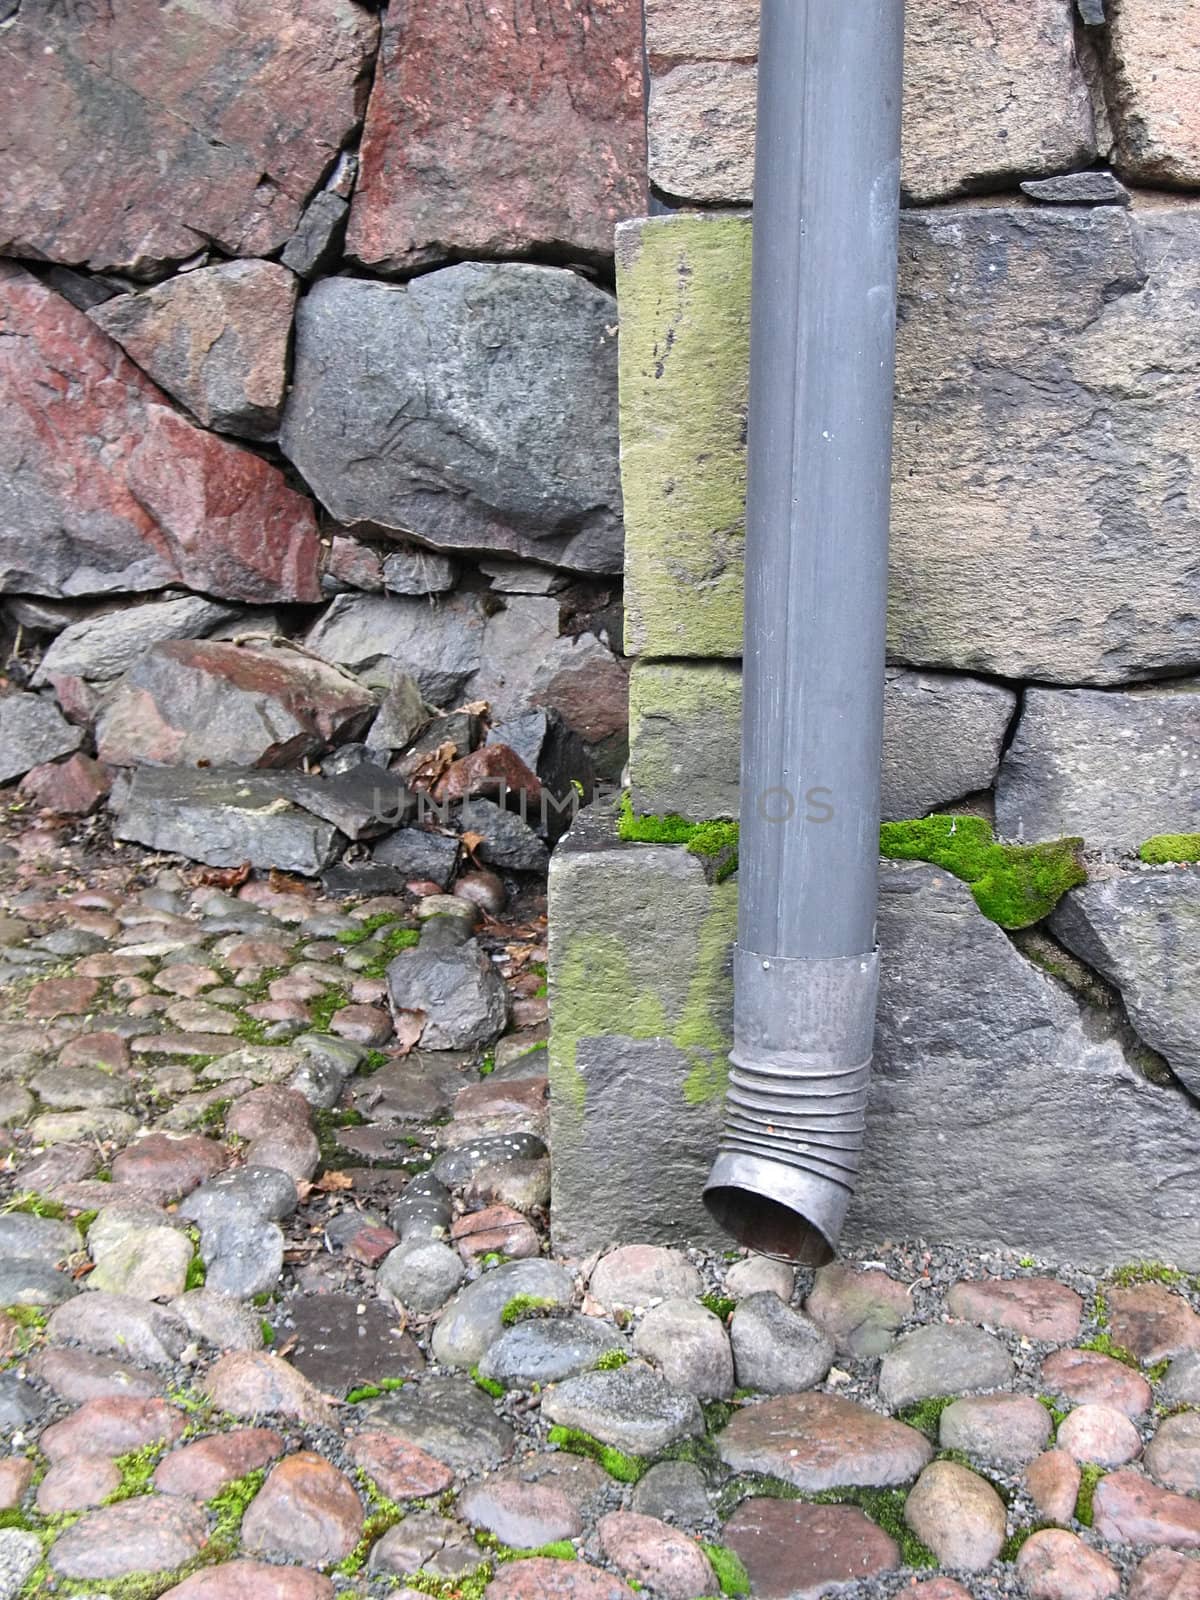 Drainpipe against old stone wall and pavement